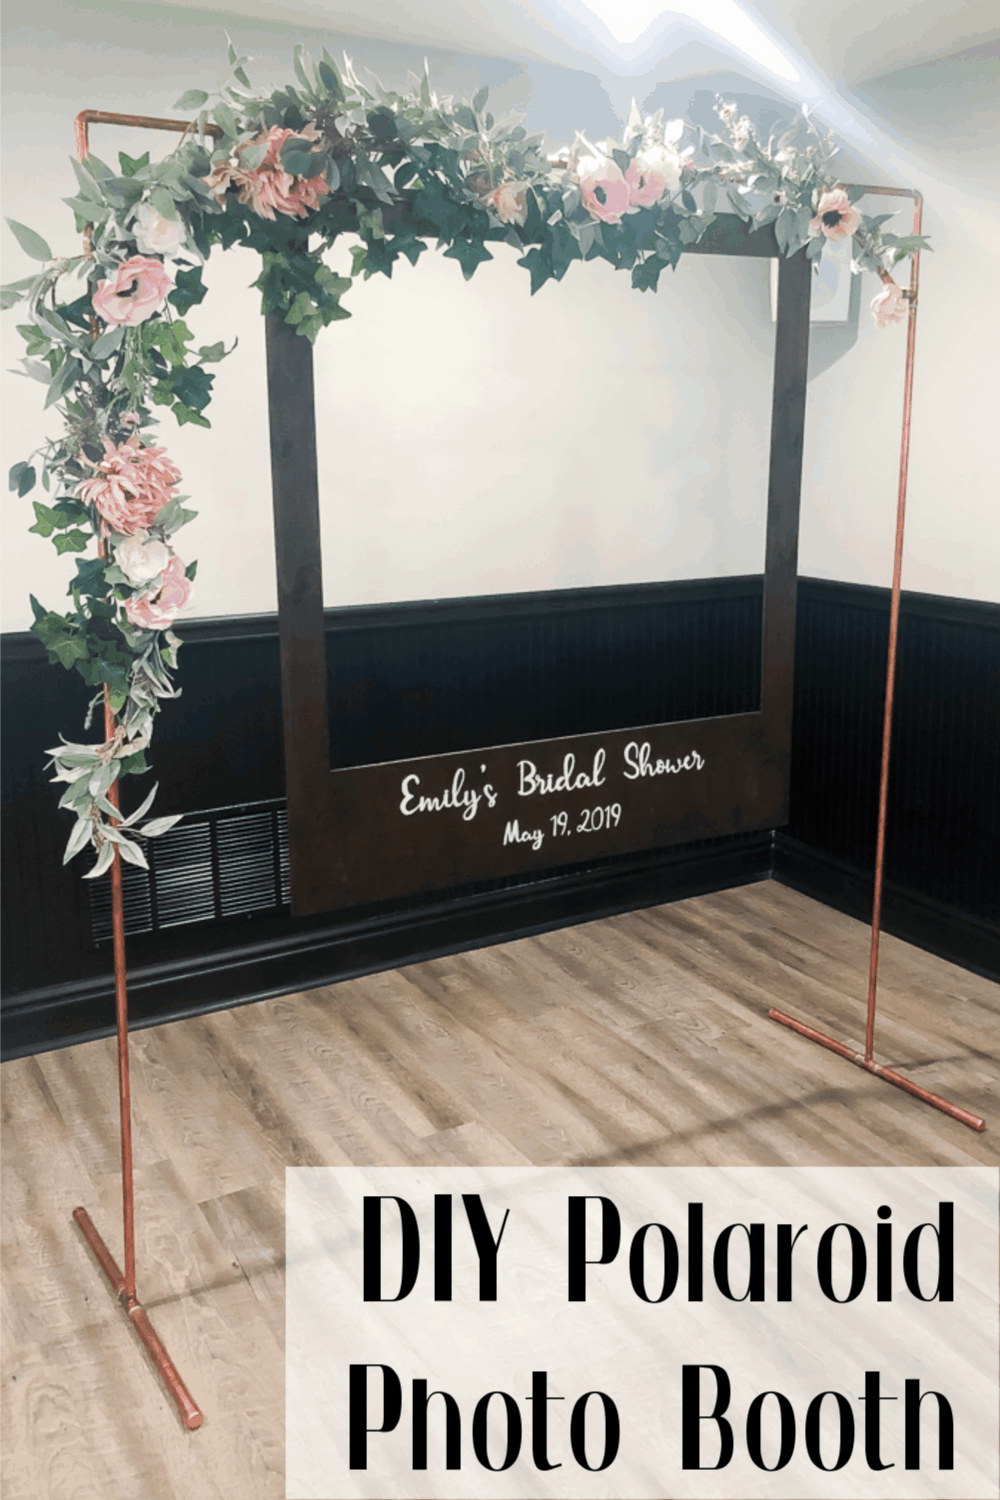 A creative DIY polaroid photo booth made with a copper pipe arch decorated with flower garland. A wooden polaroid frame hangs from the arch, and says "Emily's Bridal Shower, May 19, 2019" in white paint.